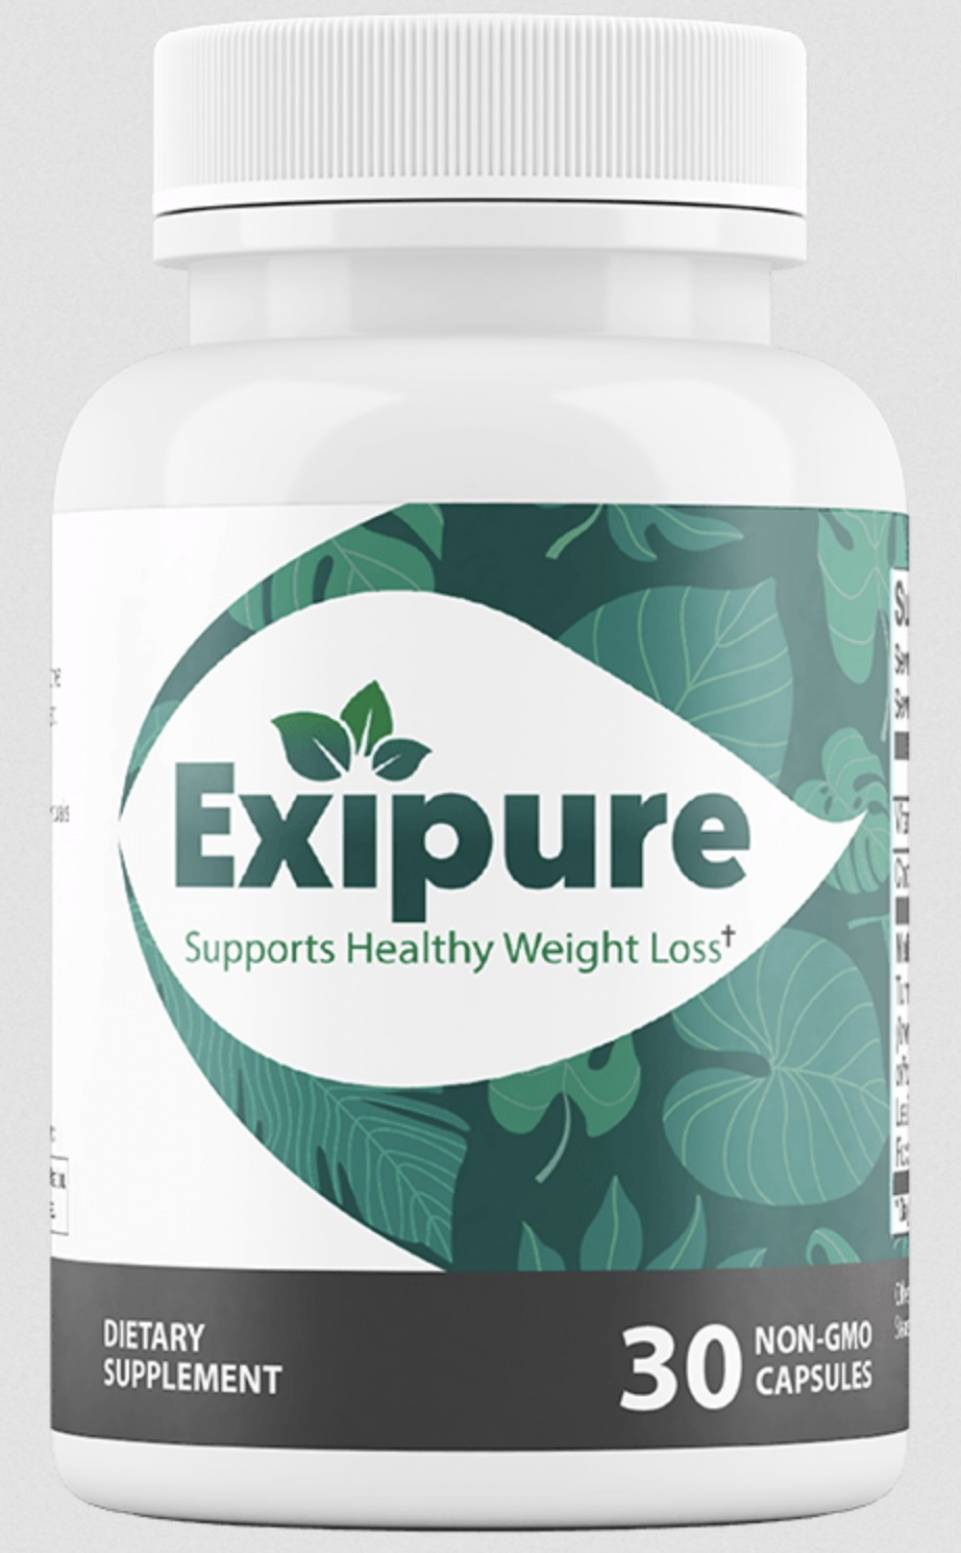 Cheapest Place To Buy Exipure